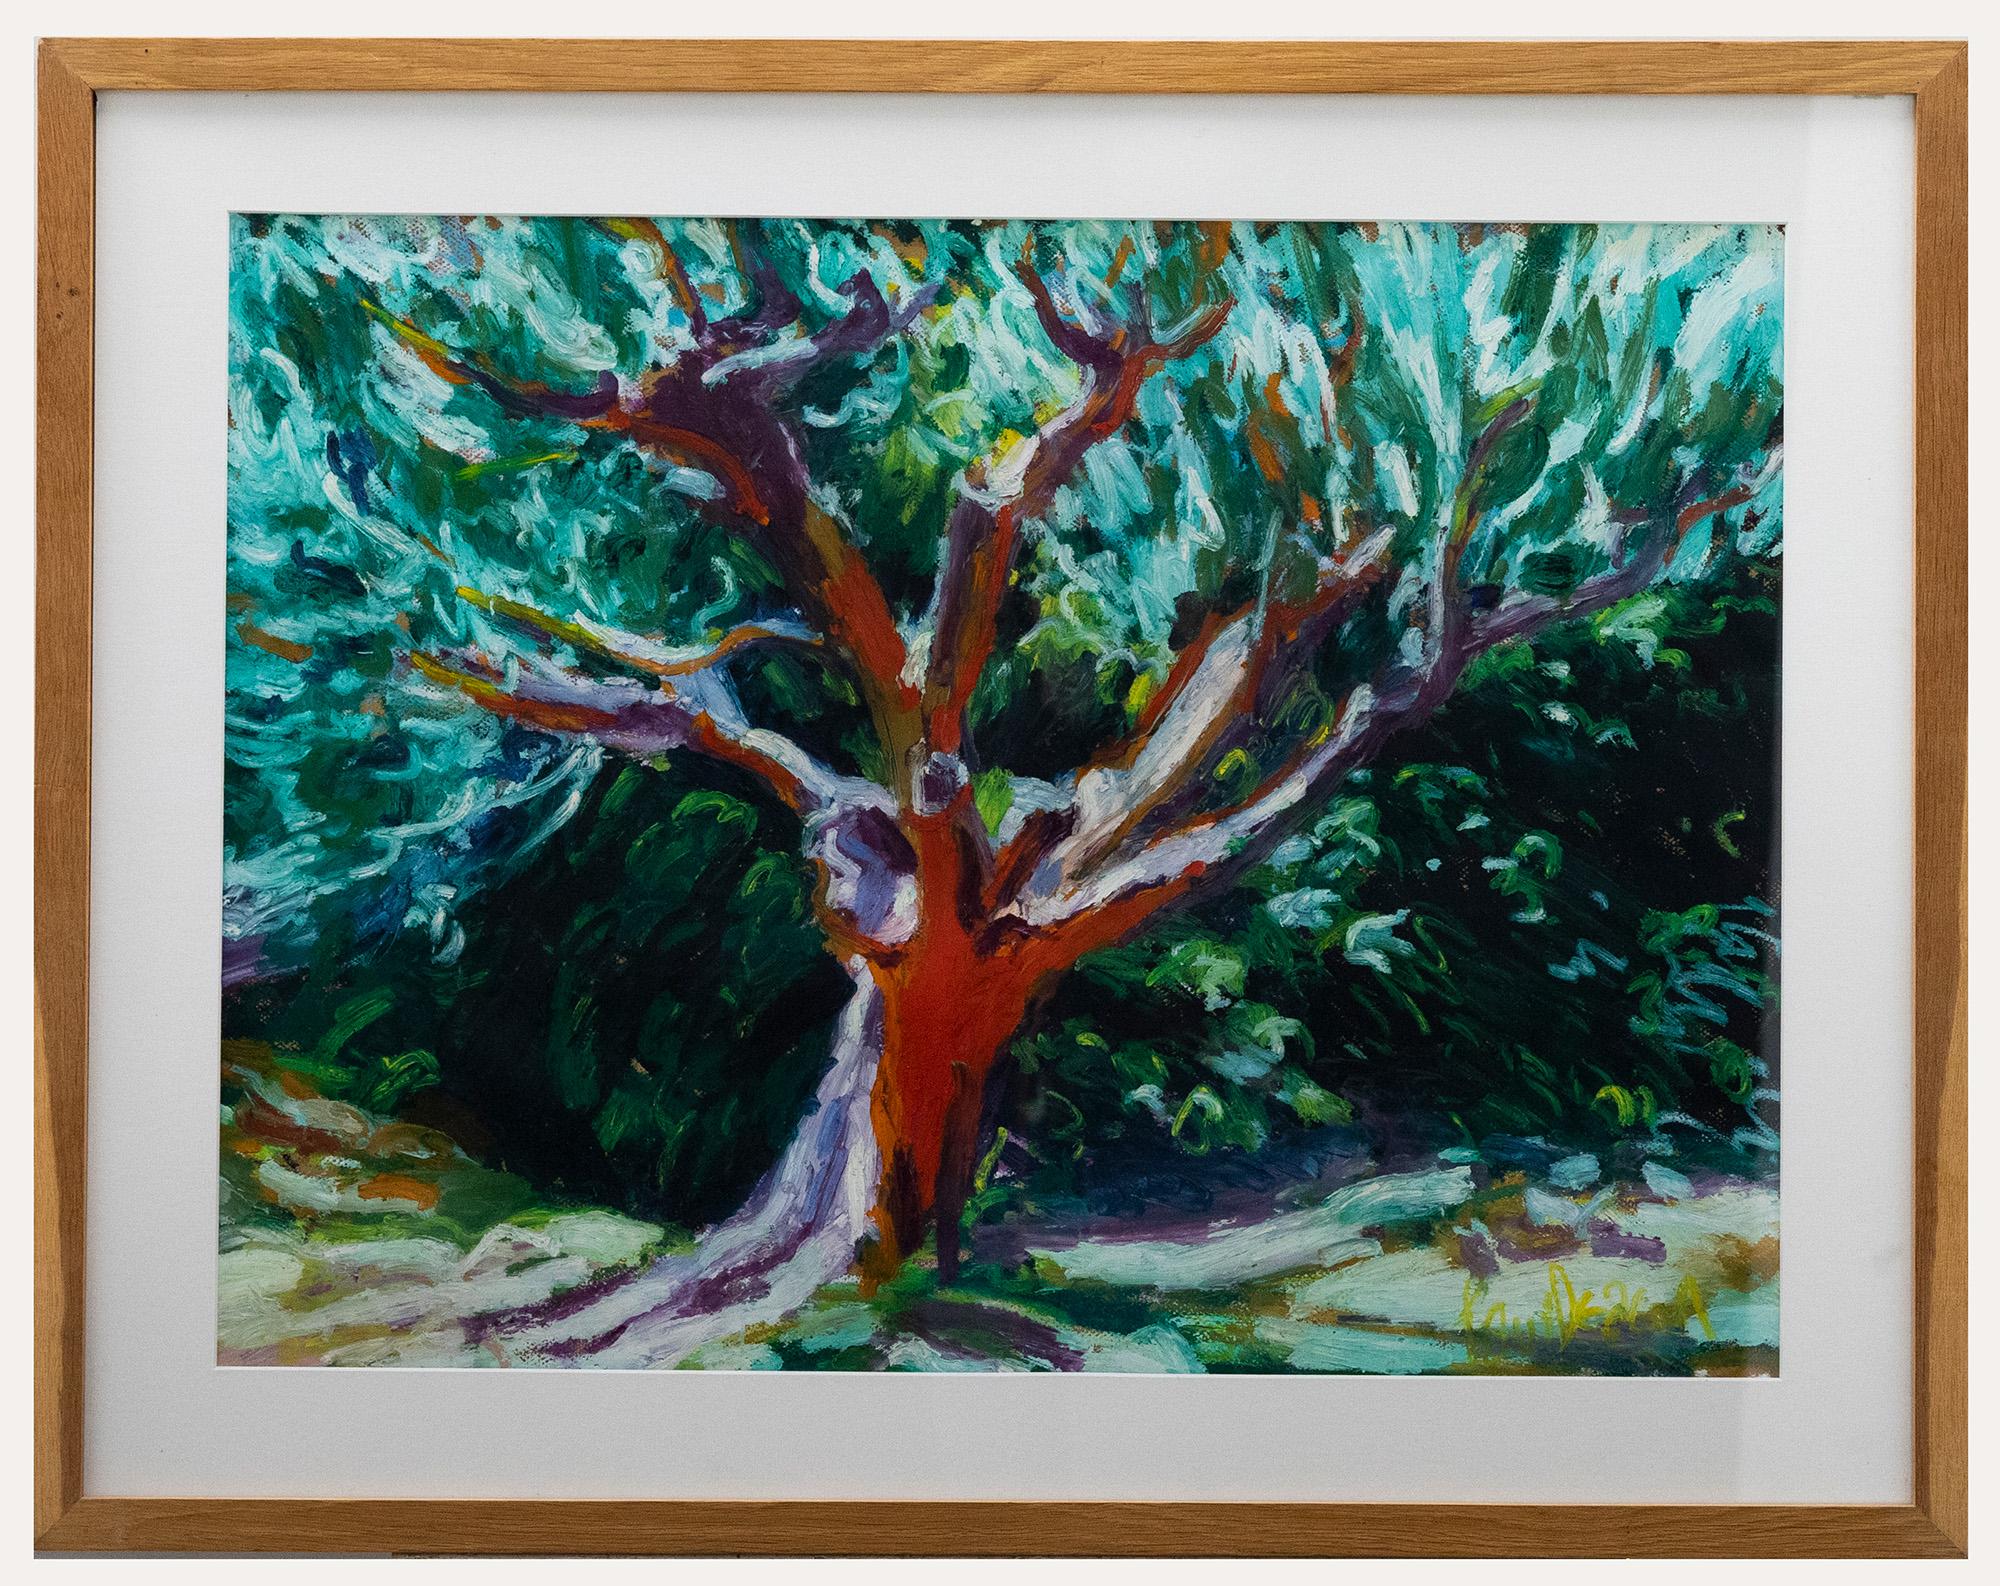 Unknown Landscape Art – Paul Deacon (geb. 1953) - Contemporary Oil Bar Pastel, A Grand Old Olive Tree